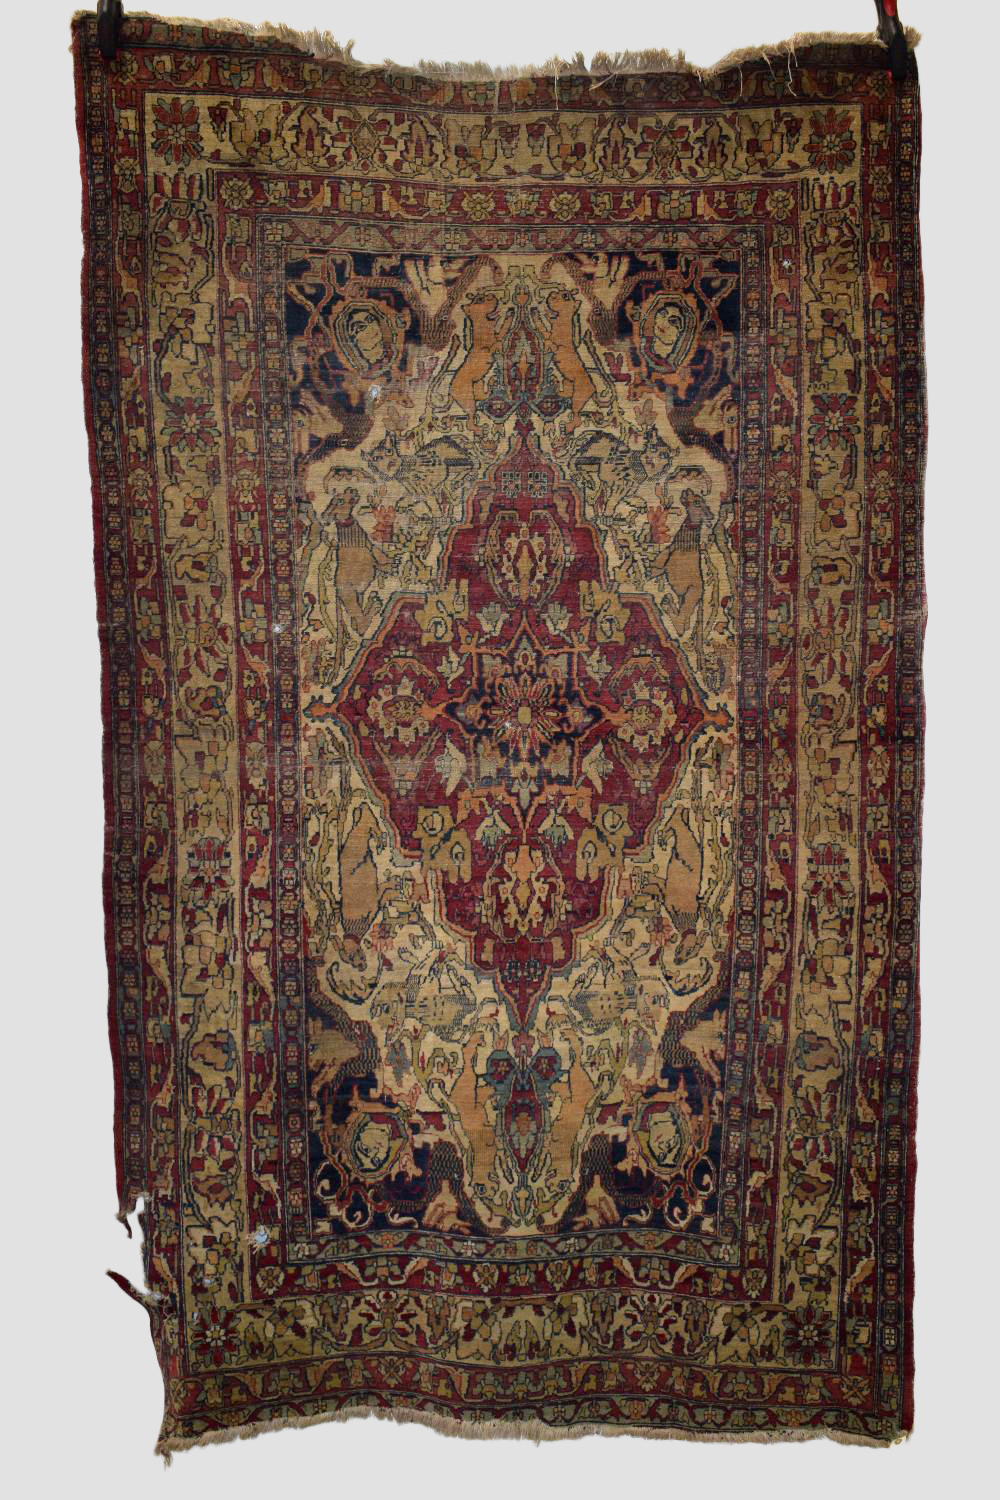 Kirman pictorial rug, south east Persia, circa 1920s-30s, 7ft. 1in. X 4ft. 3in. 2.16m. X 1.30m.